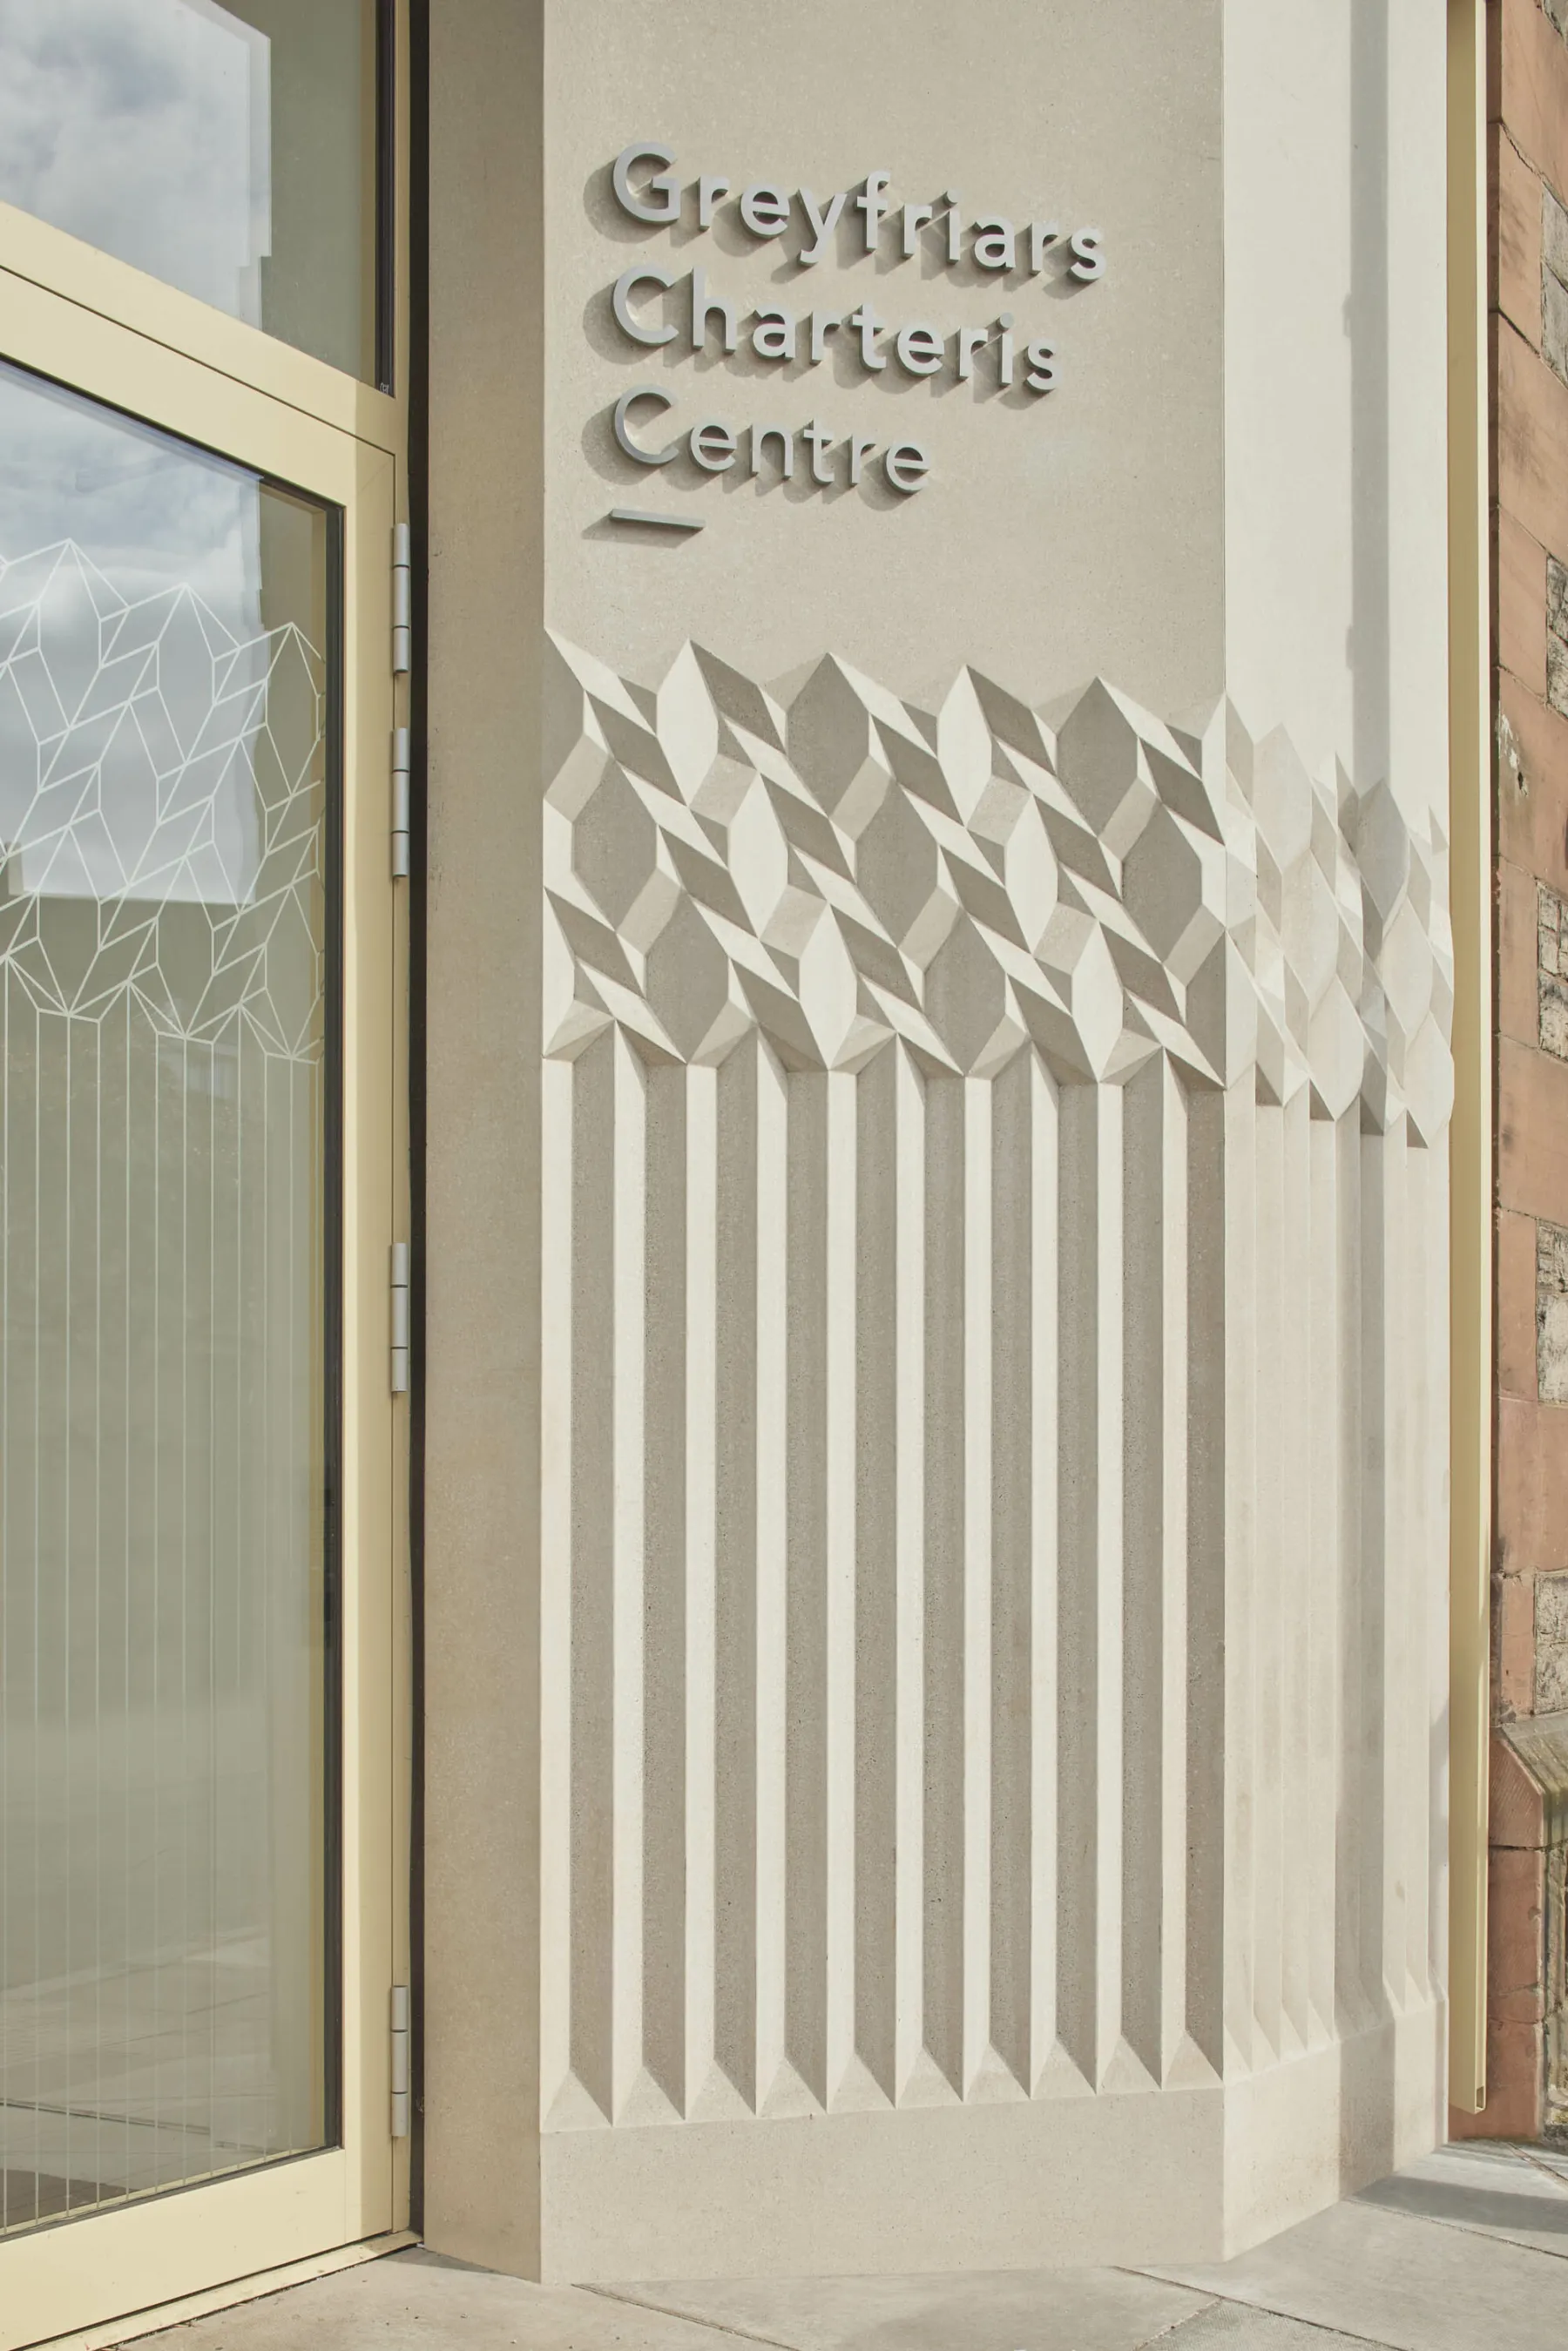 Detail of the pale, sandy coloured terrazzo cladding at Greyfriars Charteris Centre, Edinburgh. Textured decoration sits beneath the sign. To the left, the glass door at the entrance.